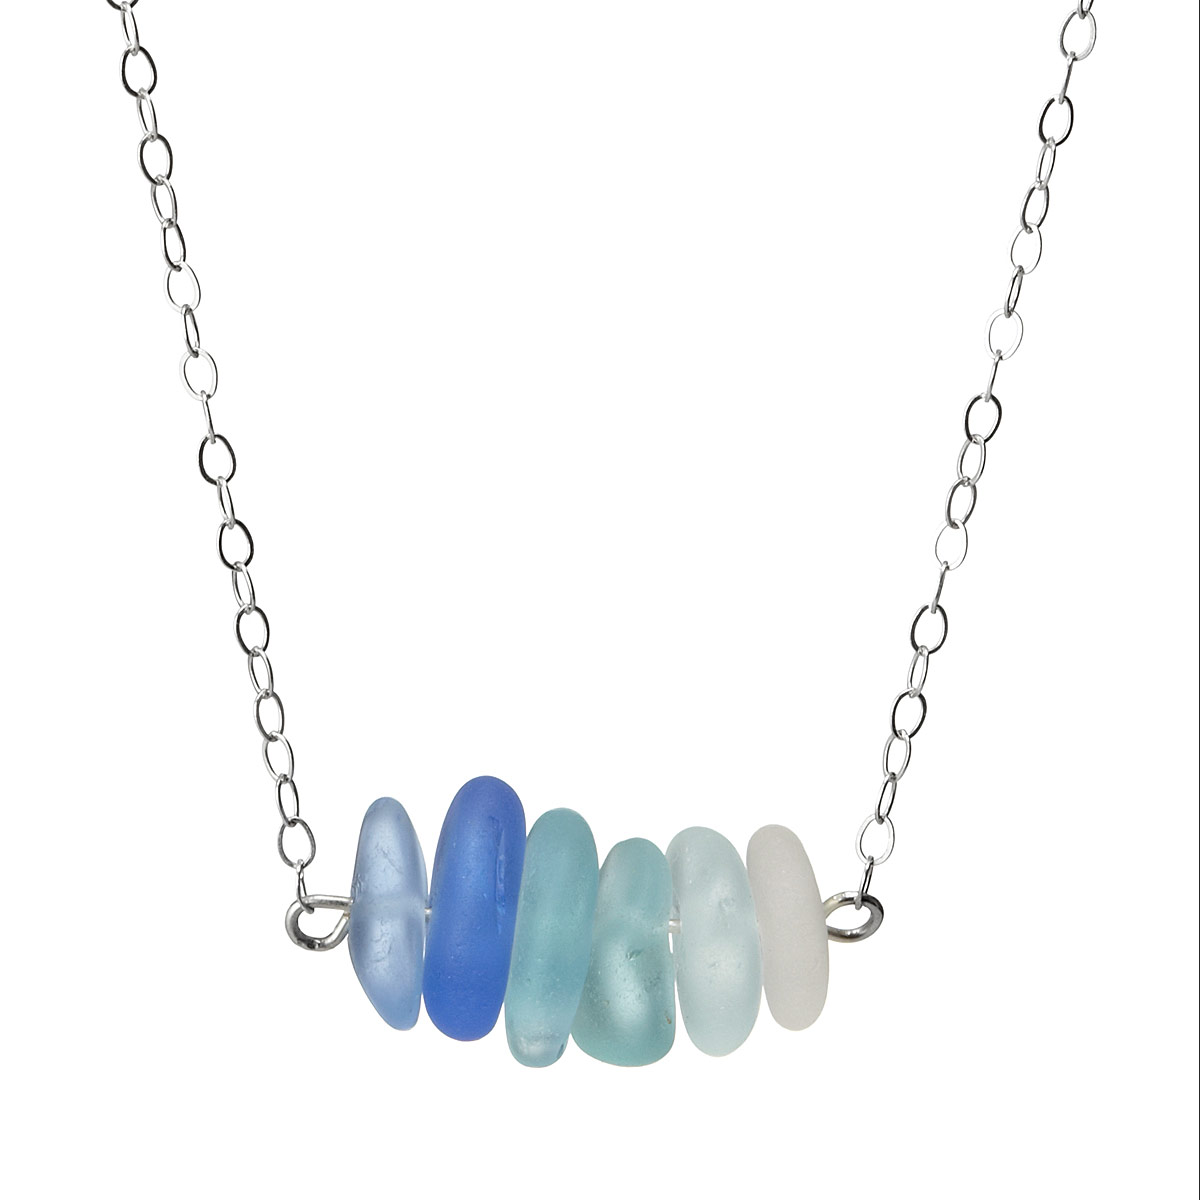 shades of blue sea glass necklace 1 thumbnail GGTMQBV